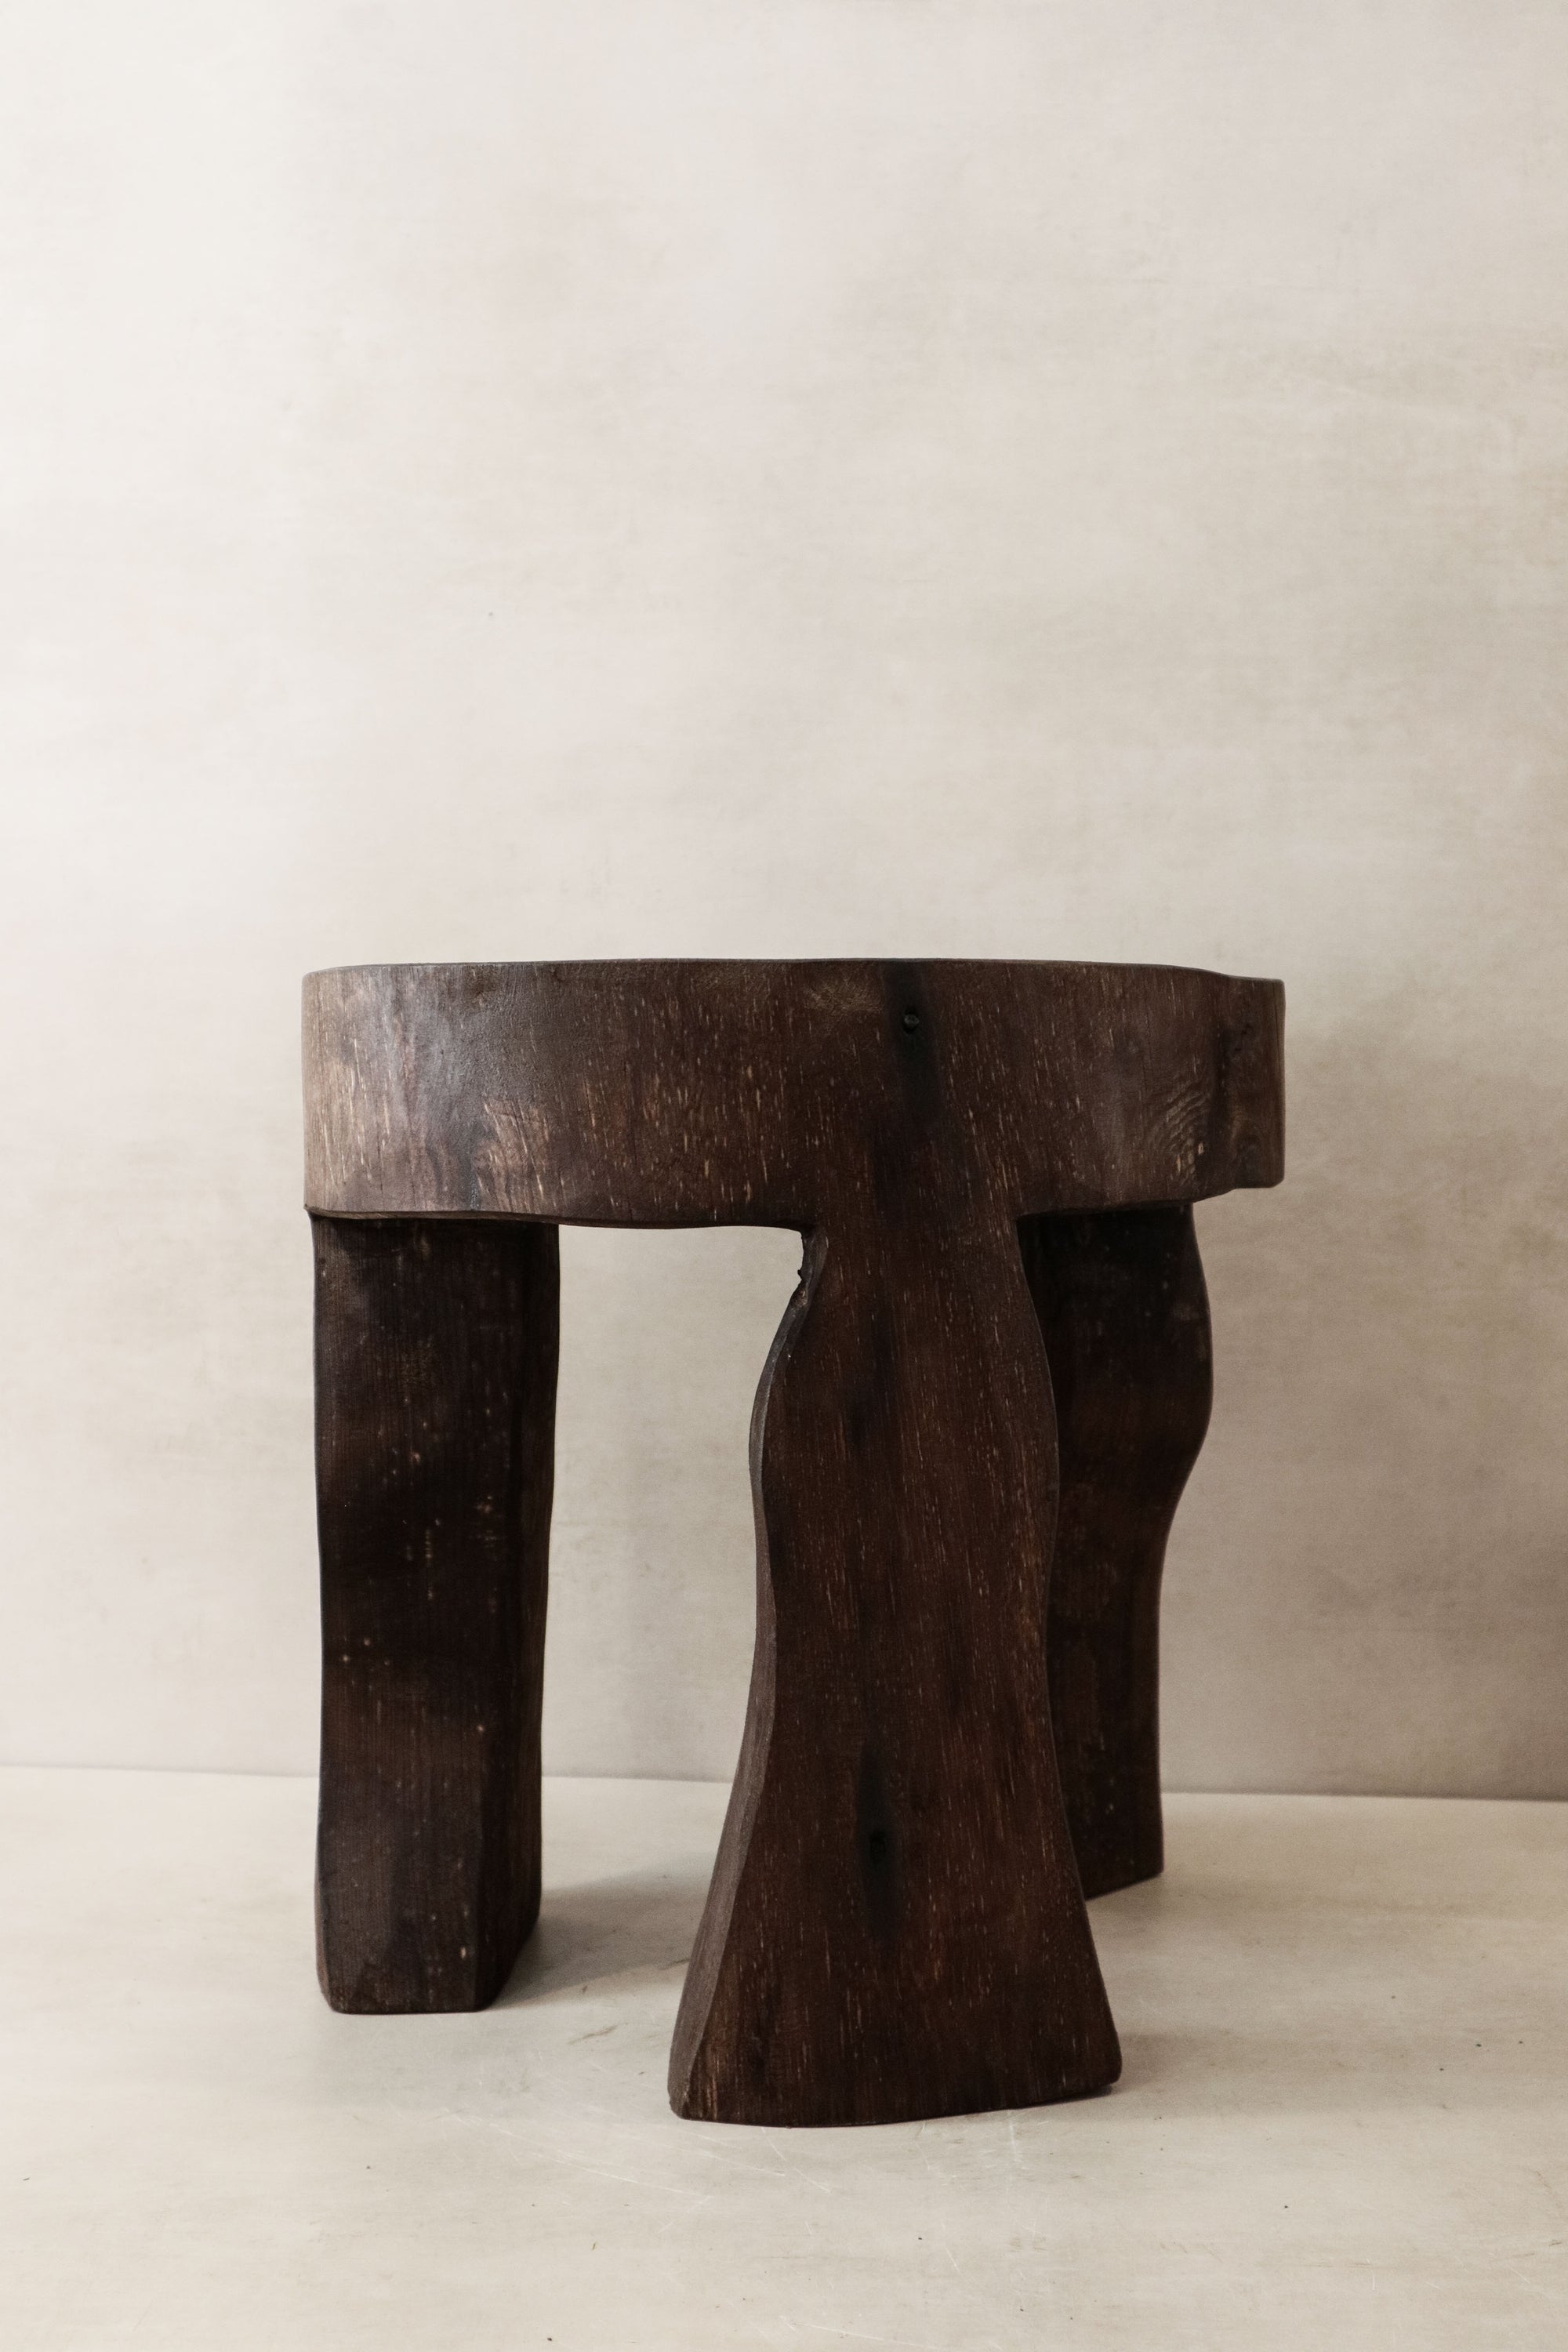 Hand Carved Wooden Stool\Side Table - 48.3